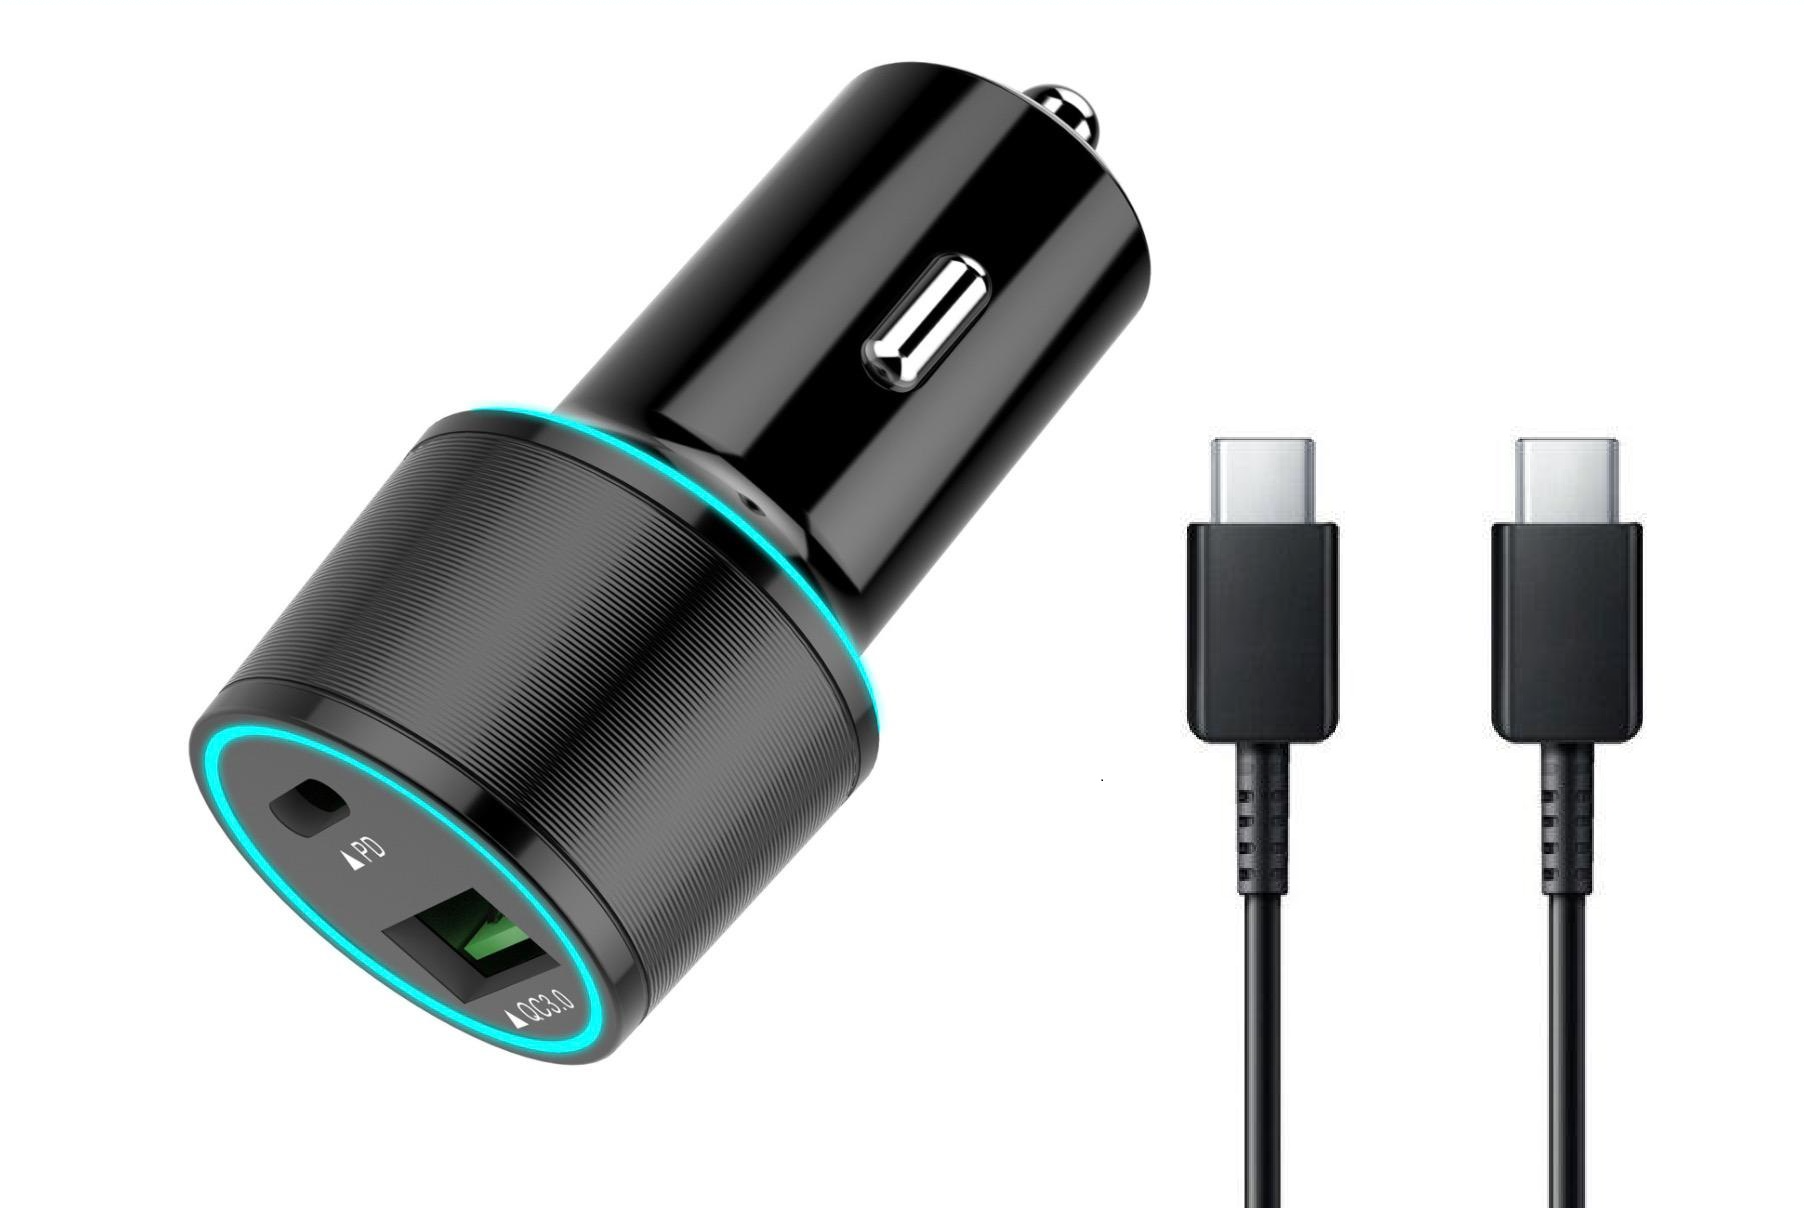 USB C Car Charger UrbanX 20W Car and Truck Charger For ZTE nubia Z17 miniS with Power Delivery 3.0 Cigarette Lighter USB Charger - Black, Comes with USB C to USB C PD Cable 3.3FT 1M - image 1 of 3